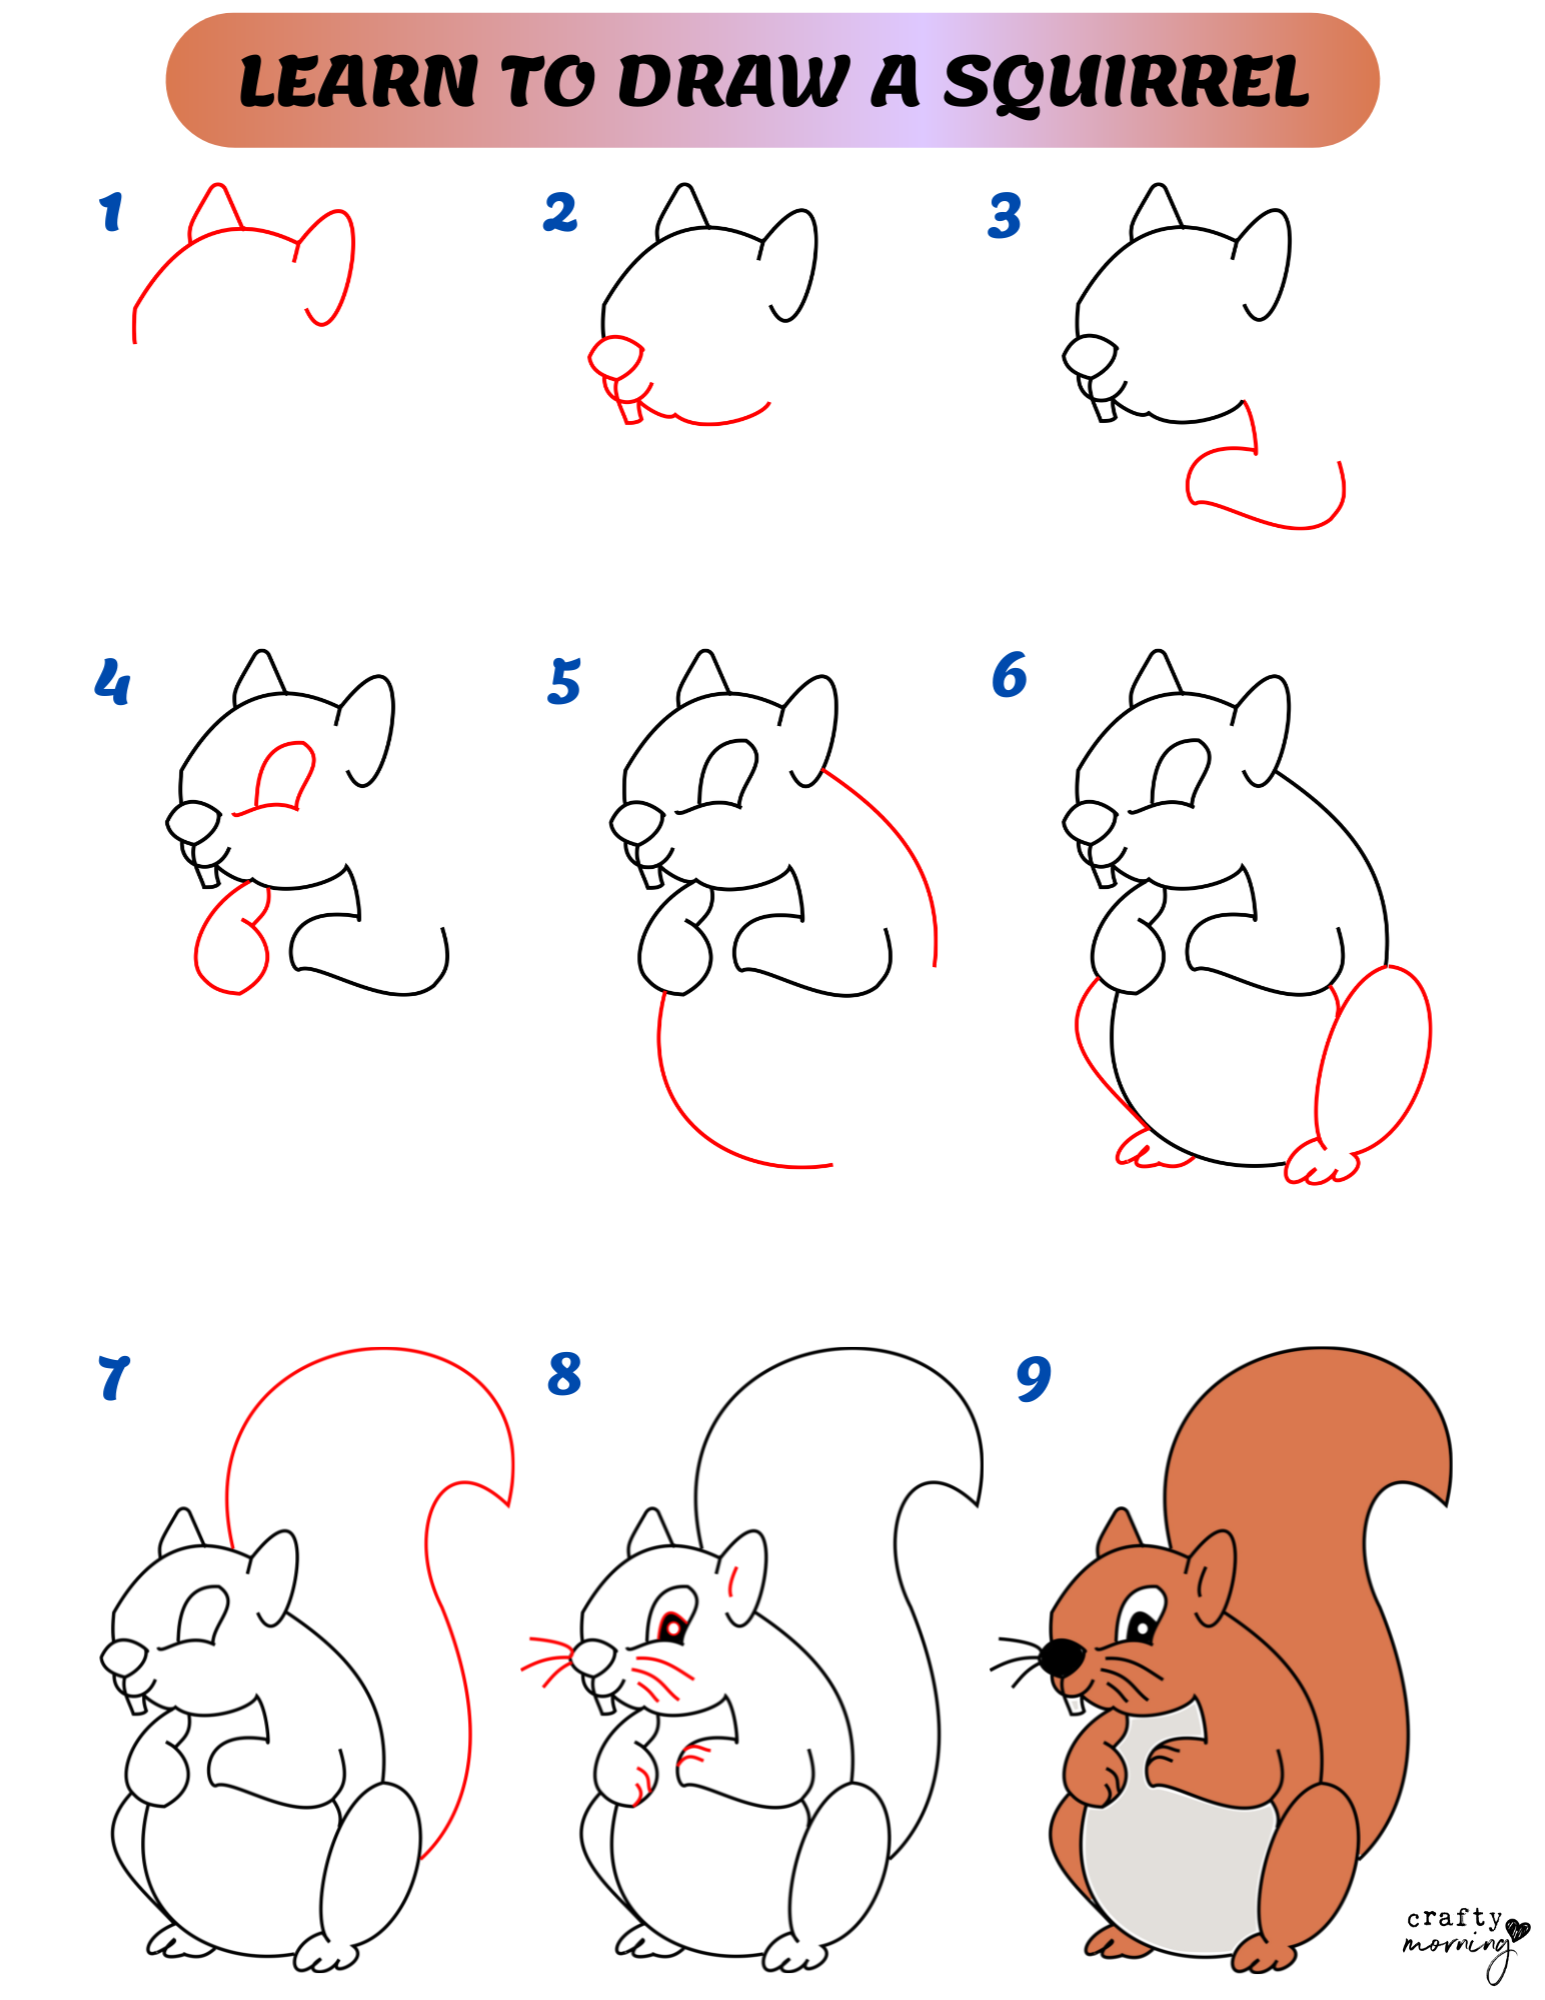 https://cdn.craftymorning.com/wp-content/uploads/2022/10/how-to-draw-a-squirrel-easy.png